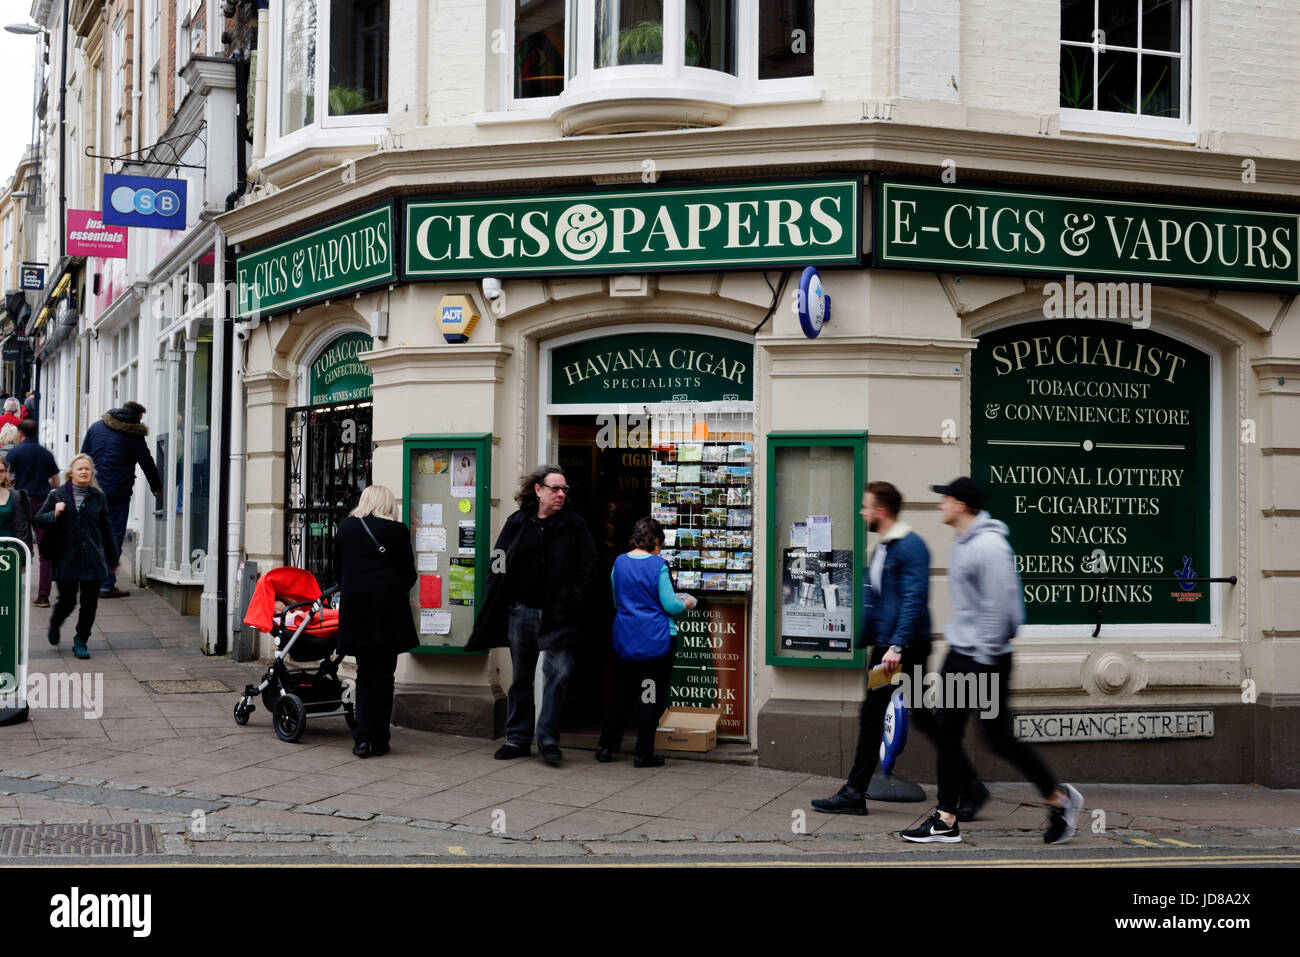 Cigarette ans smoking shop in Norwich, Norfolk, England Stock Photo